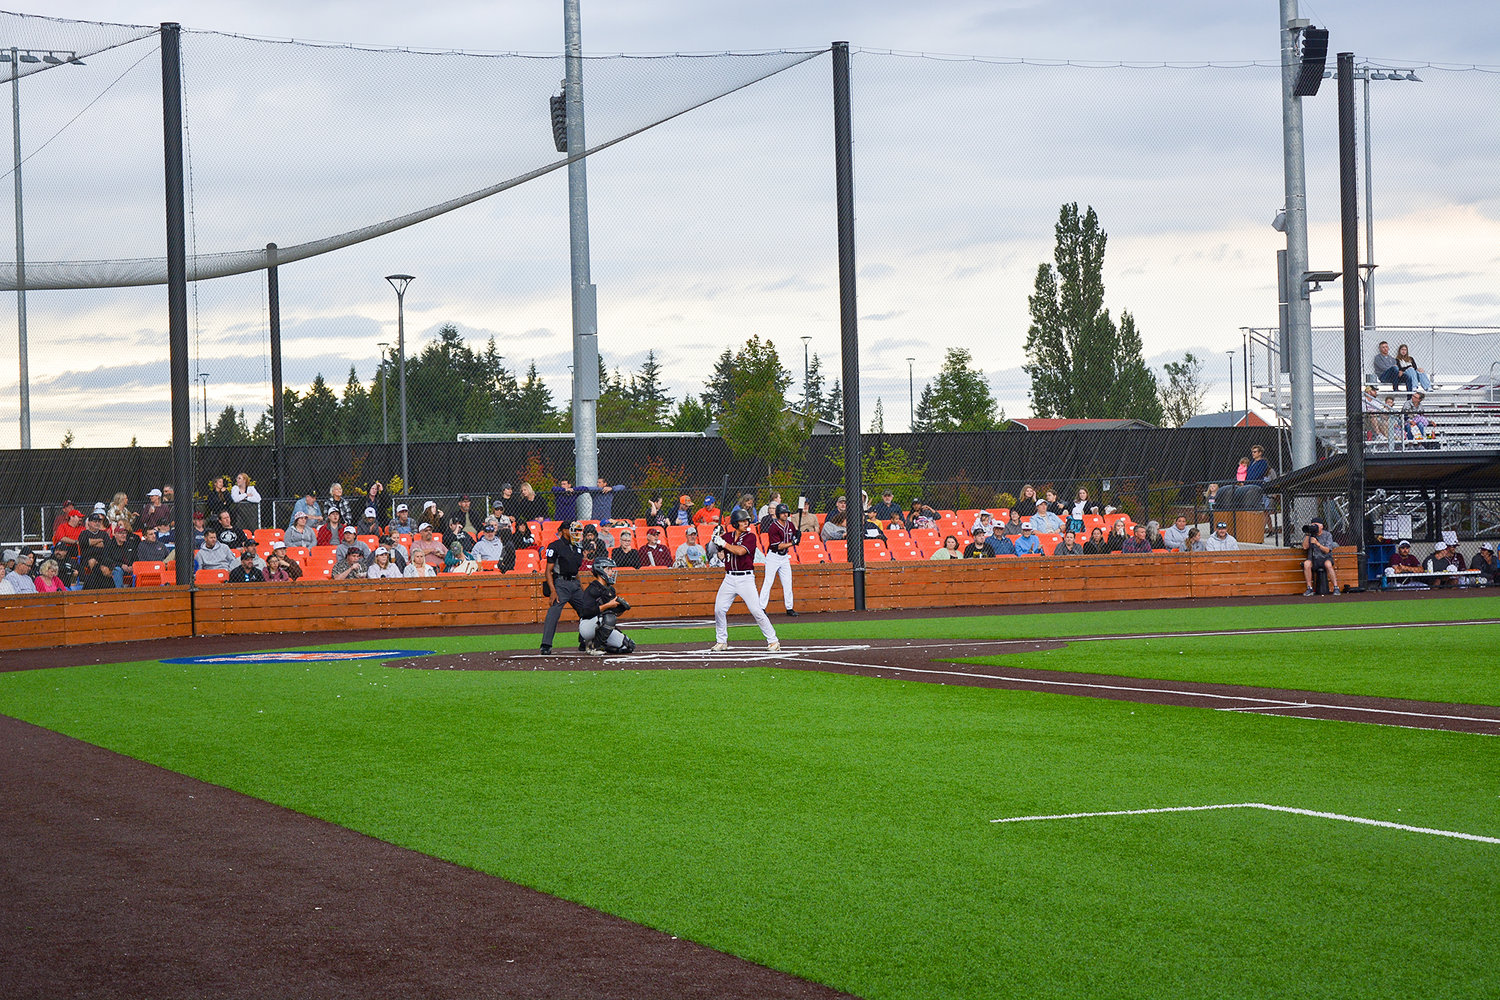 Jacob Sharp steps up to bat at the Ridgefield Raptors game against the Corvallis Knights on July 6.